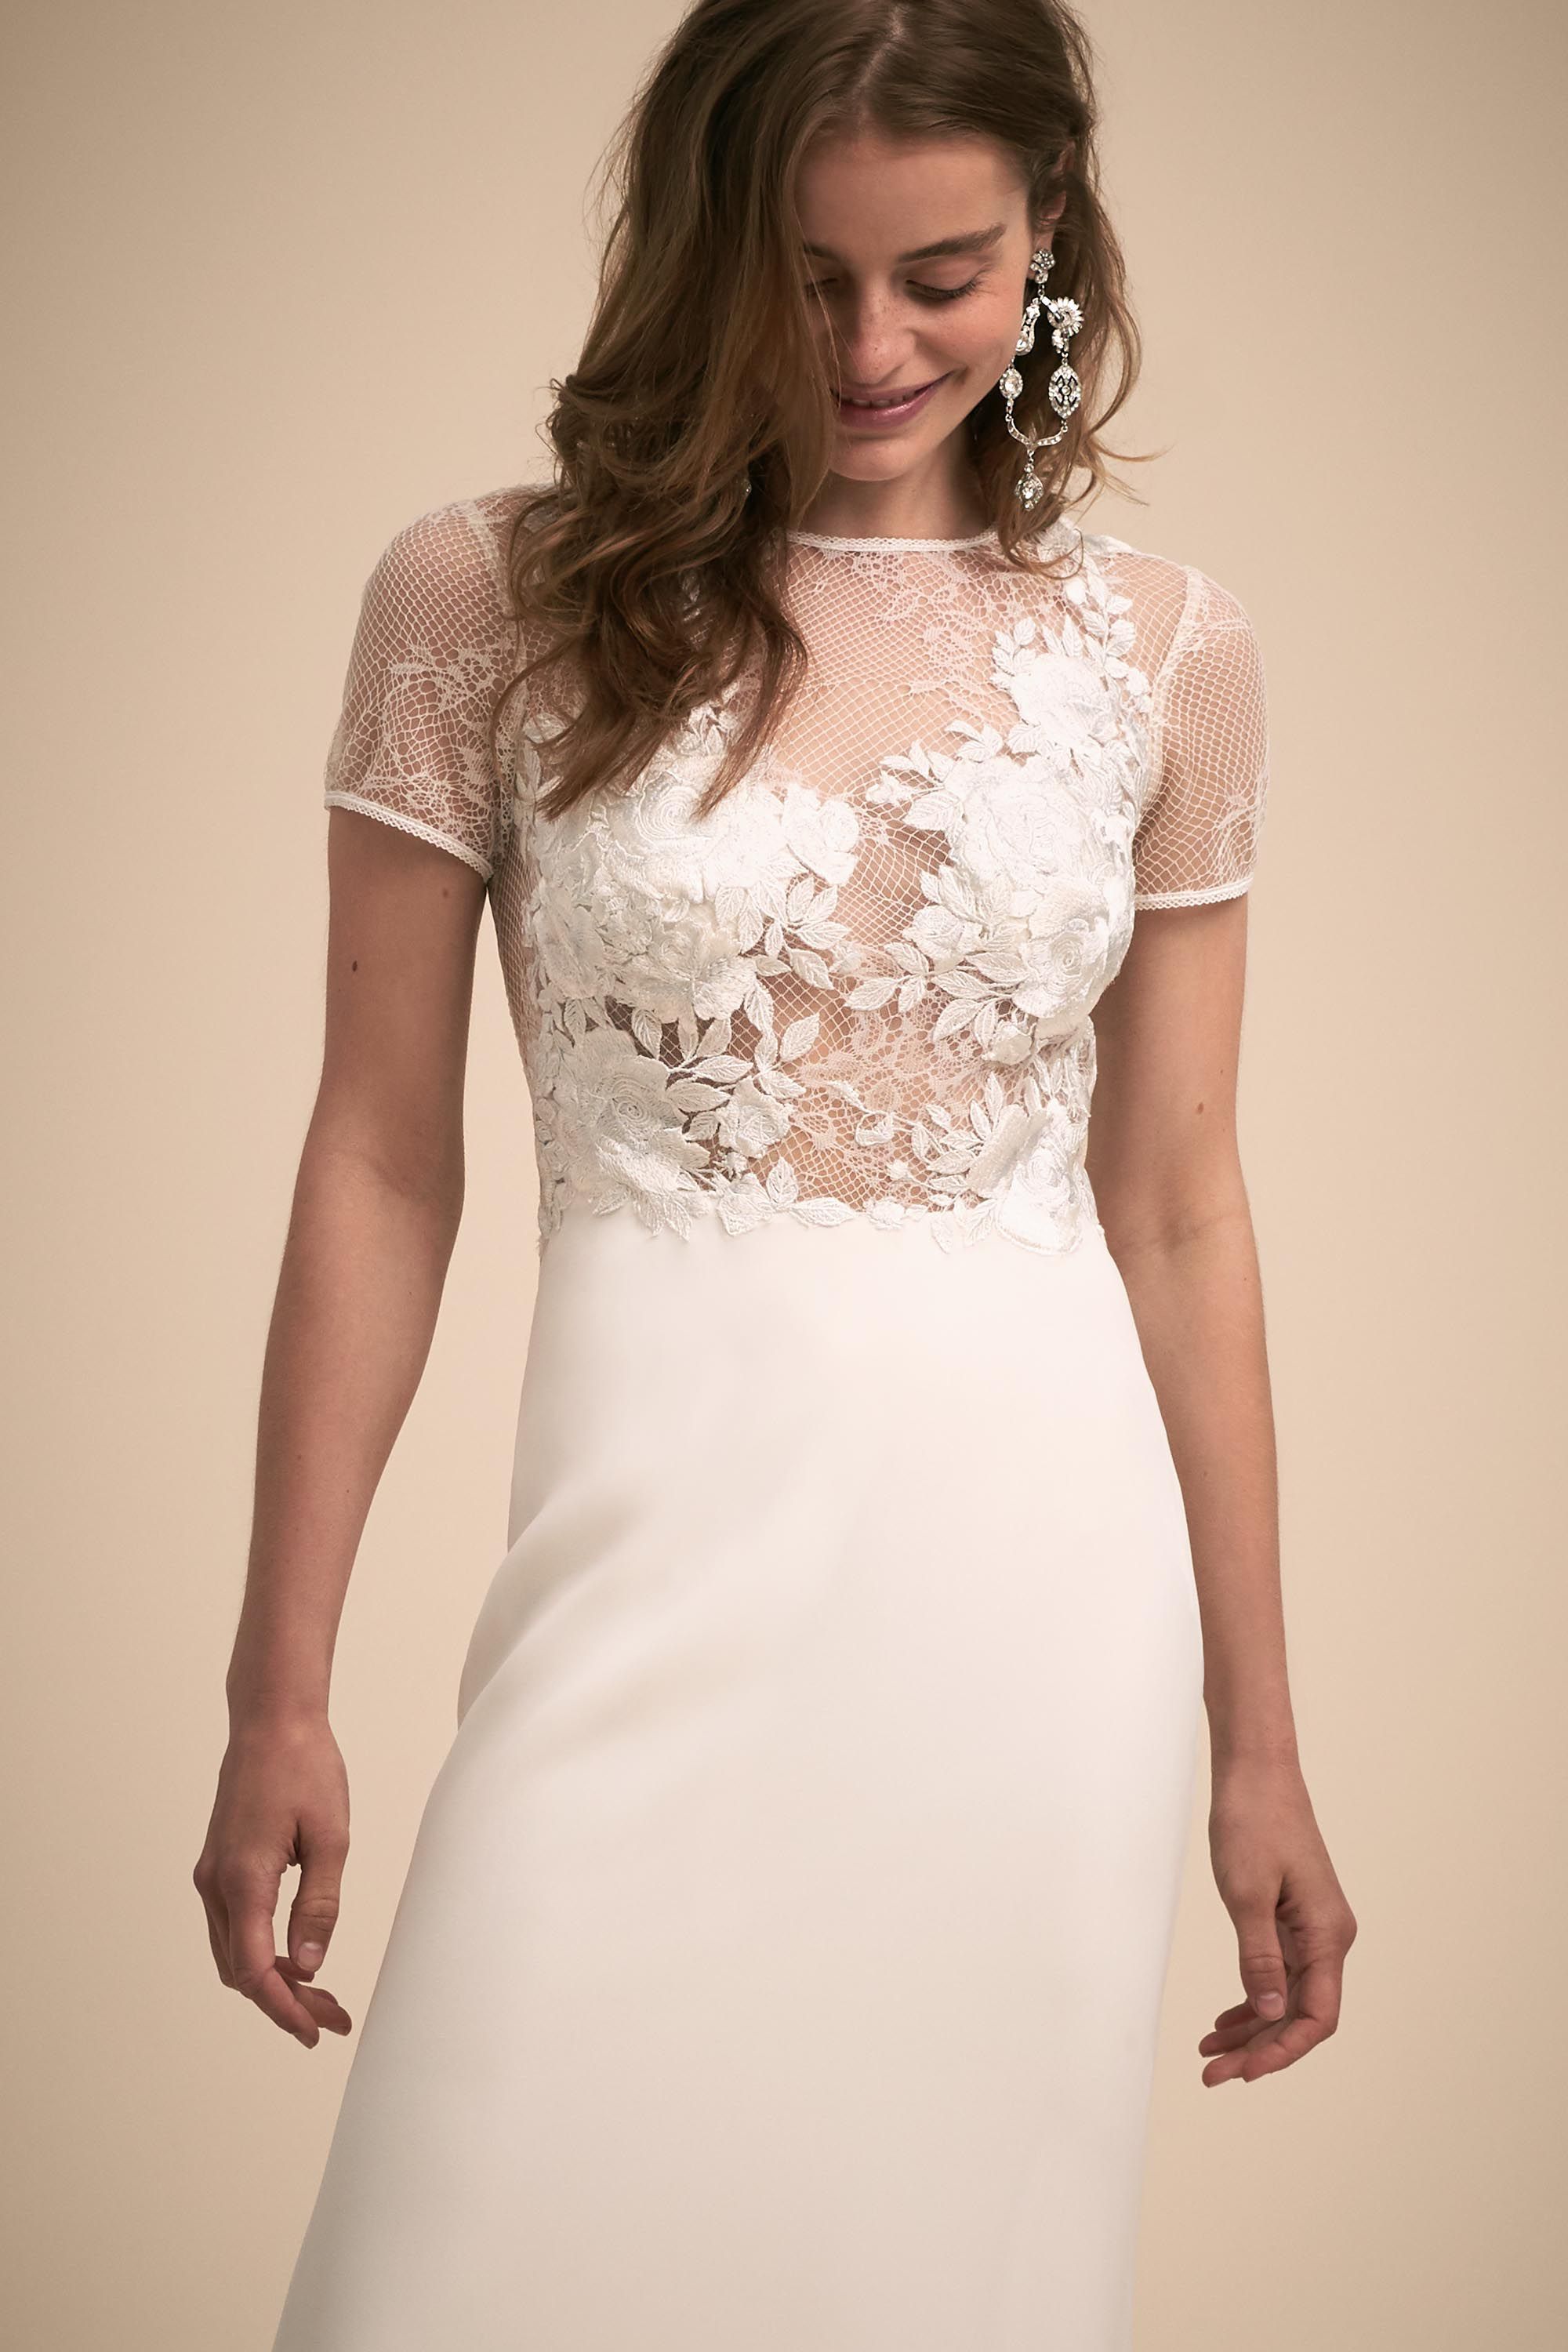 Vintage Lace Wedding Dresses | Lace Wedding Gowns | BHLDN